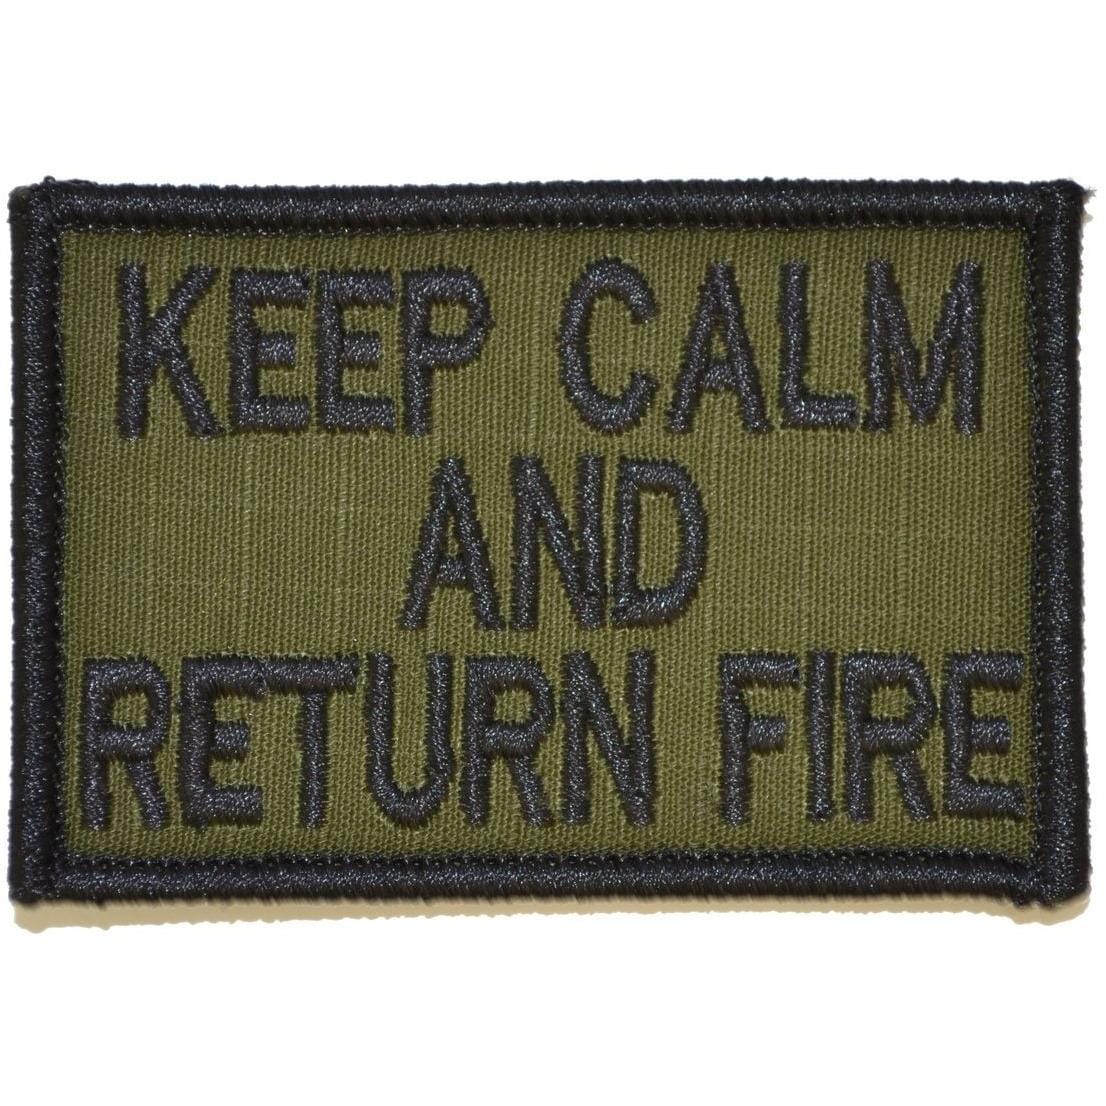 Tactical Gear Junkie Patches Olive Drab Keep Calm and Return Fire - 2x3 Patch